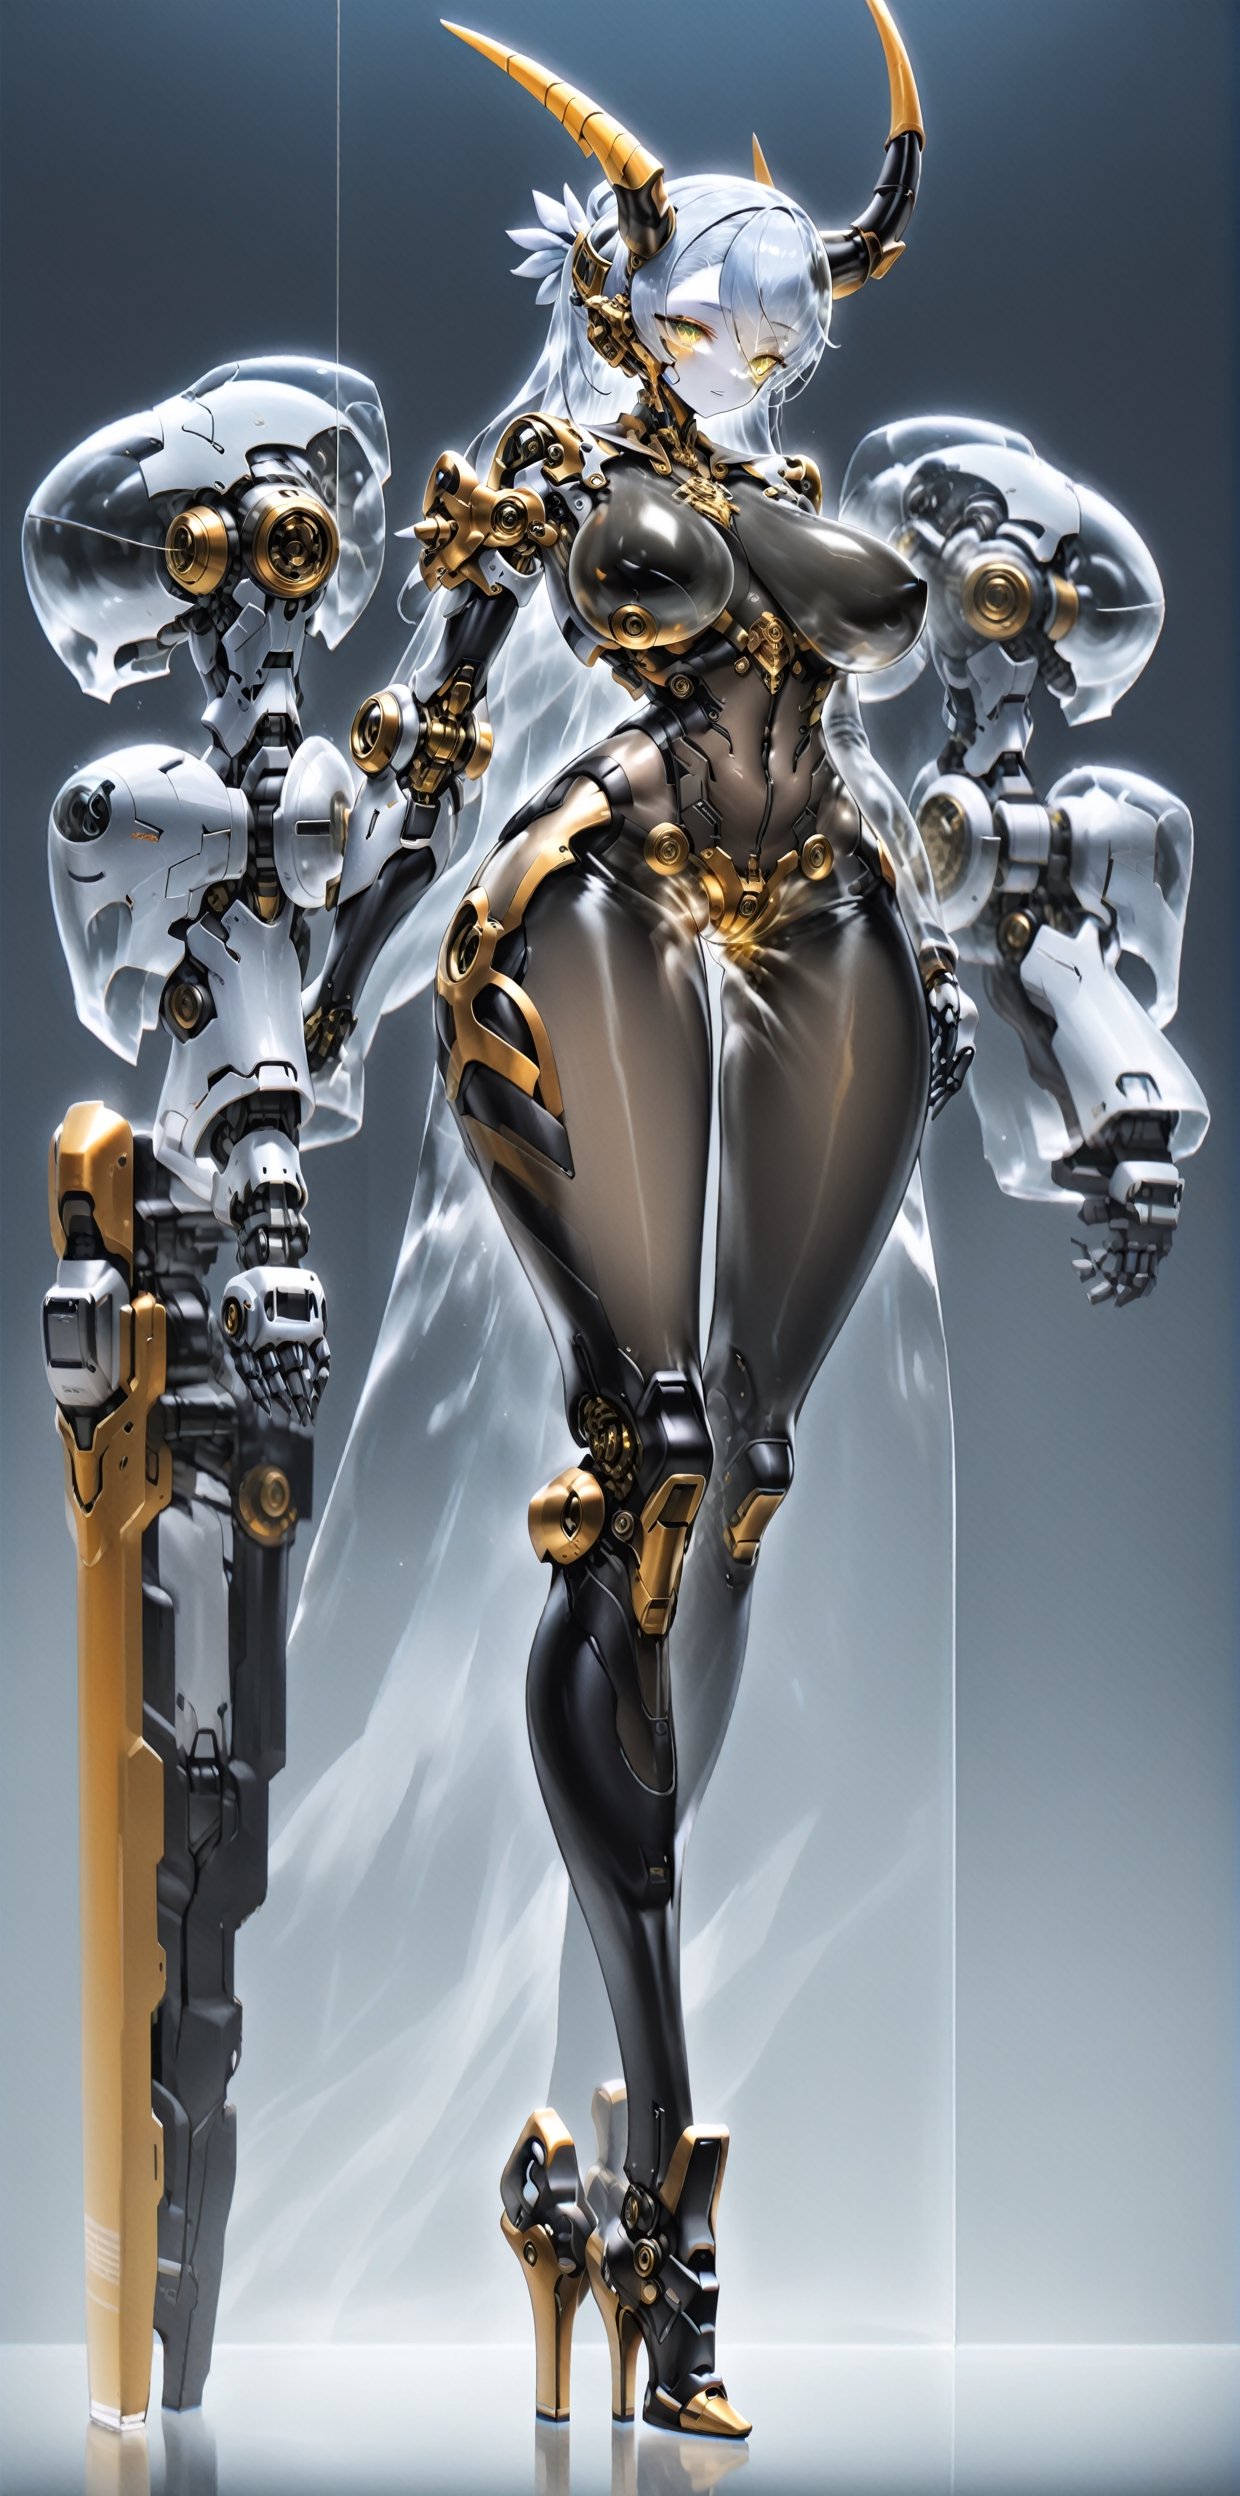 albino robot Girl, (long intricate horns:1.2),Giant weapon arms, adorned with ((transparent body parts)),(gold  breast), revealing the intricate machinery inside, giant robotic weapon, smooth and angular design despite transparent parts, pulsating energy and intricate circuitry visible through transparent body parts,high heels,Elegant curvaceous beauty,robot, mechanical arms,Glass Elements,Clear Glass Skin,hubg_mecha_girl,skinbodysuit,Blue Backlight,cyborg,bodysuit,breast bags